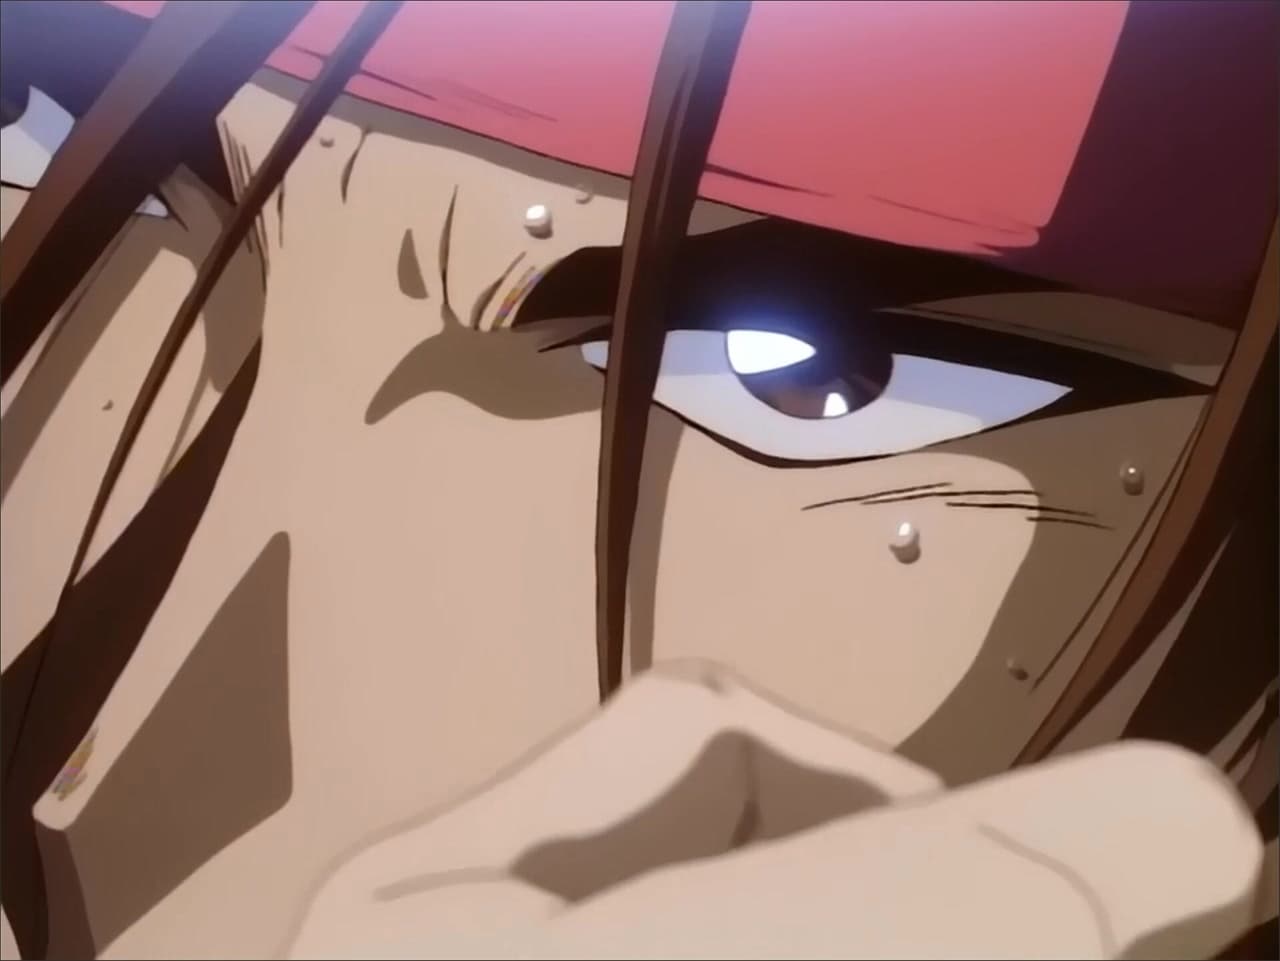 Rurouni Kenshin - Season 2 Episode 1 : Prelude to the Impending Fight: The Shadow of the Wolf Draws Near